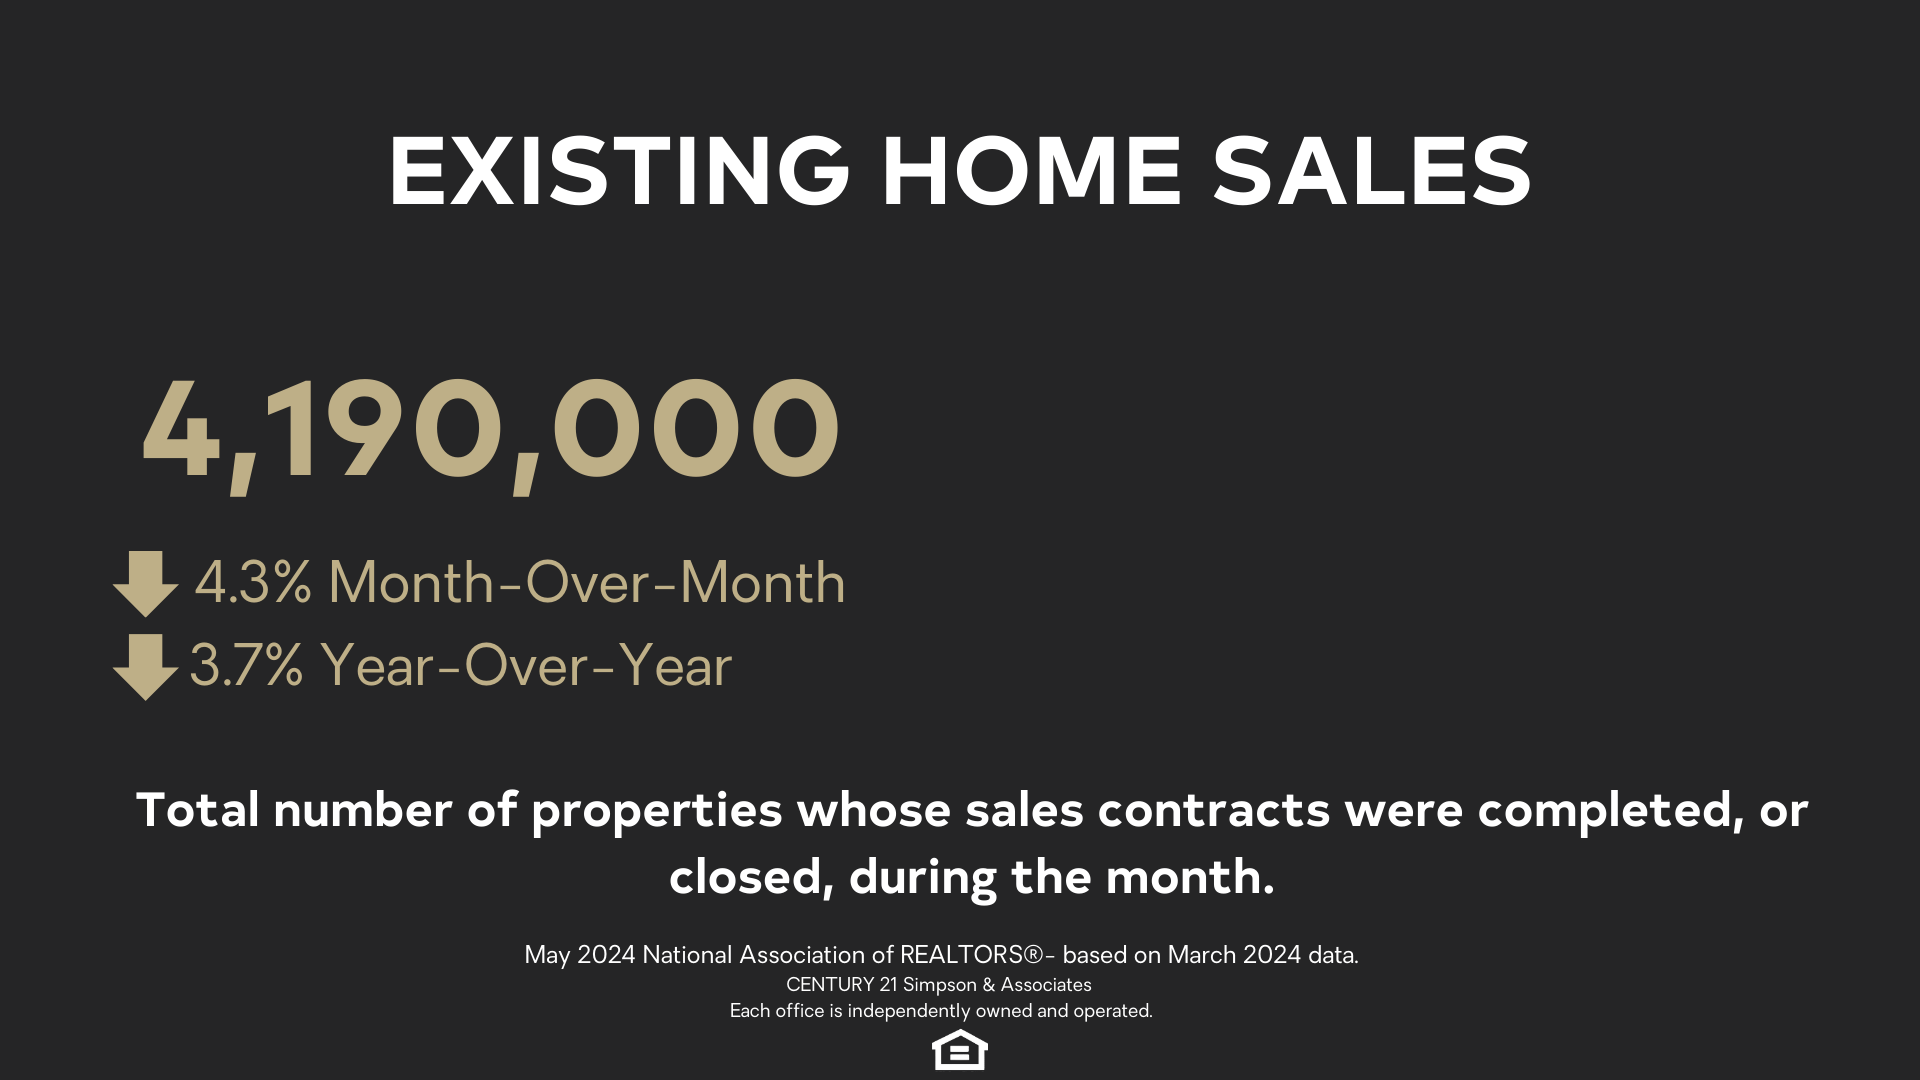 May '24 Existing Home Sales